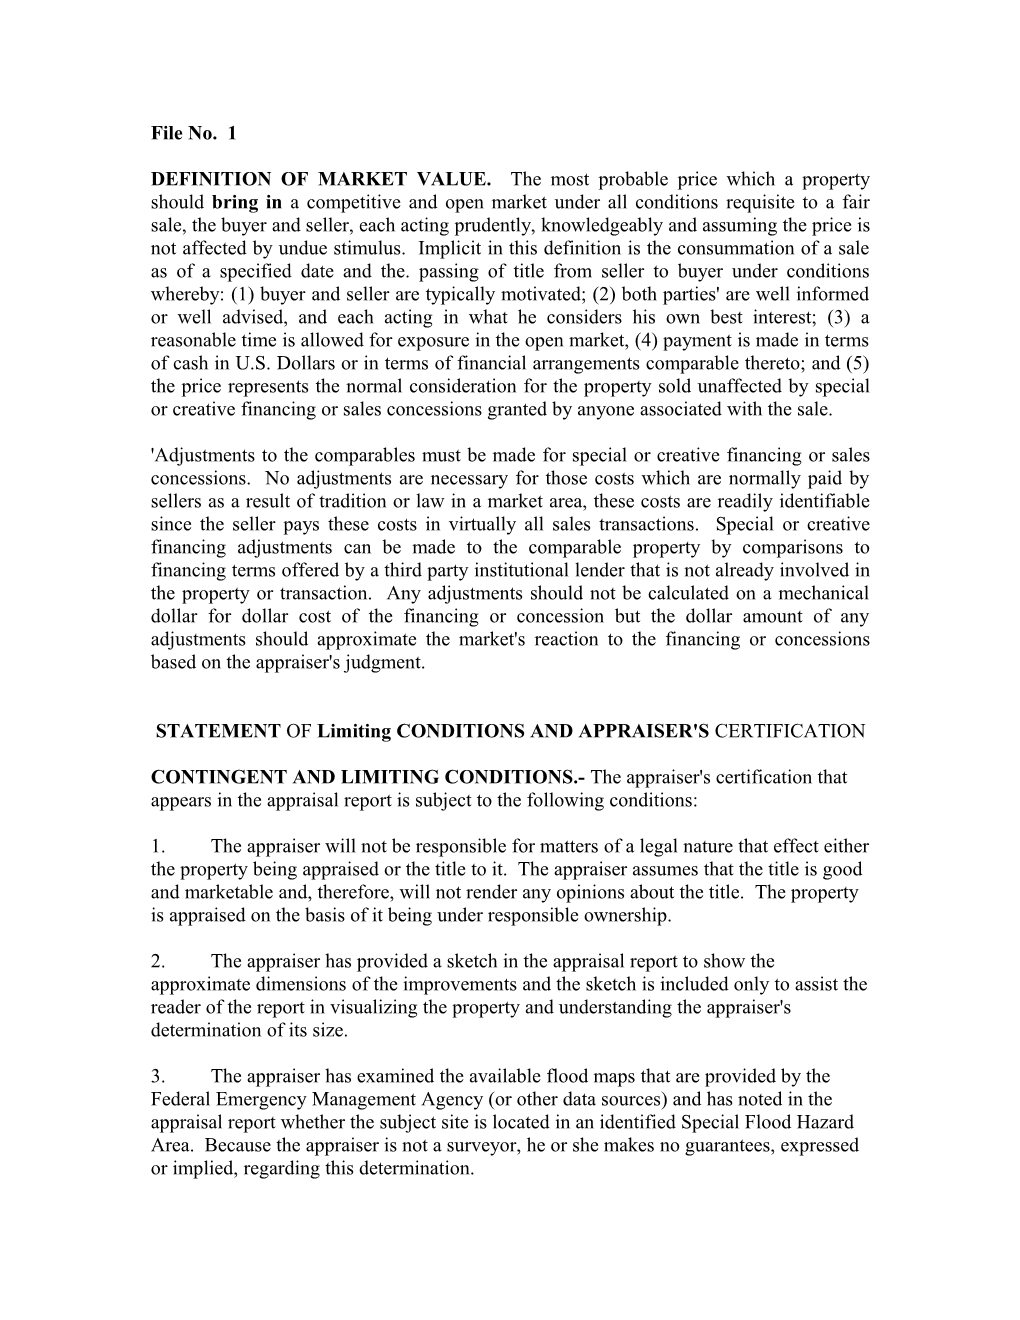 STATEMENT of Limiting CONDITIONS and APPRAISER's CERTIFICATION